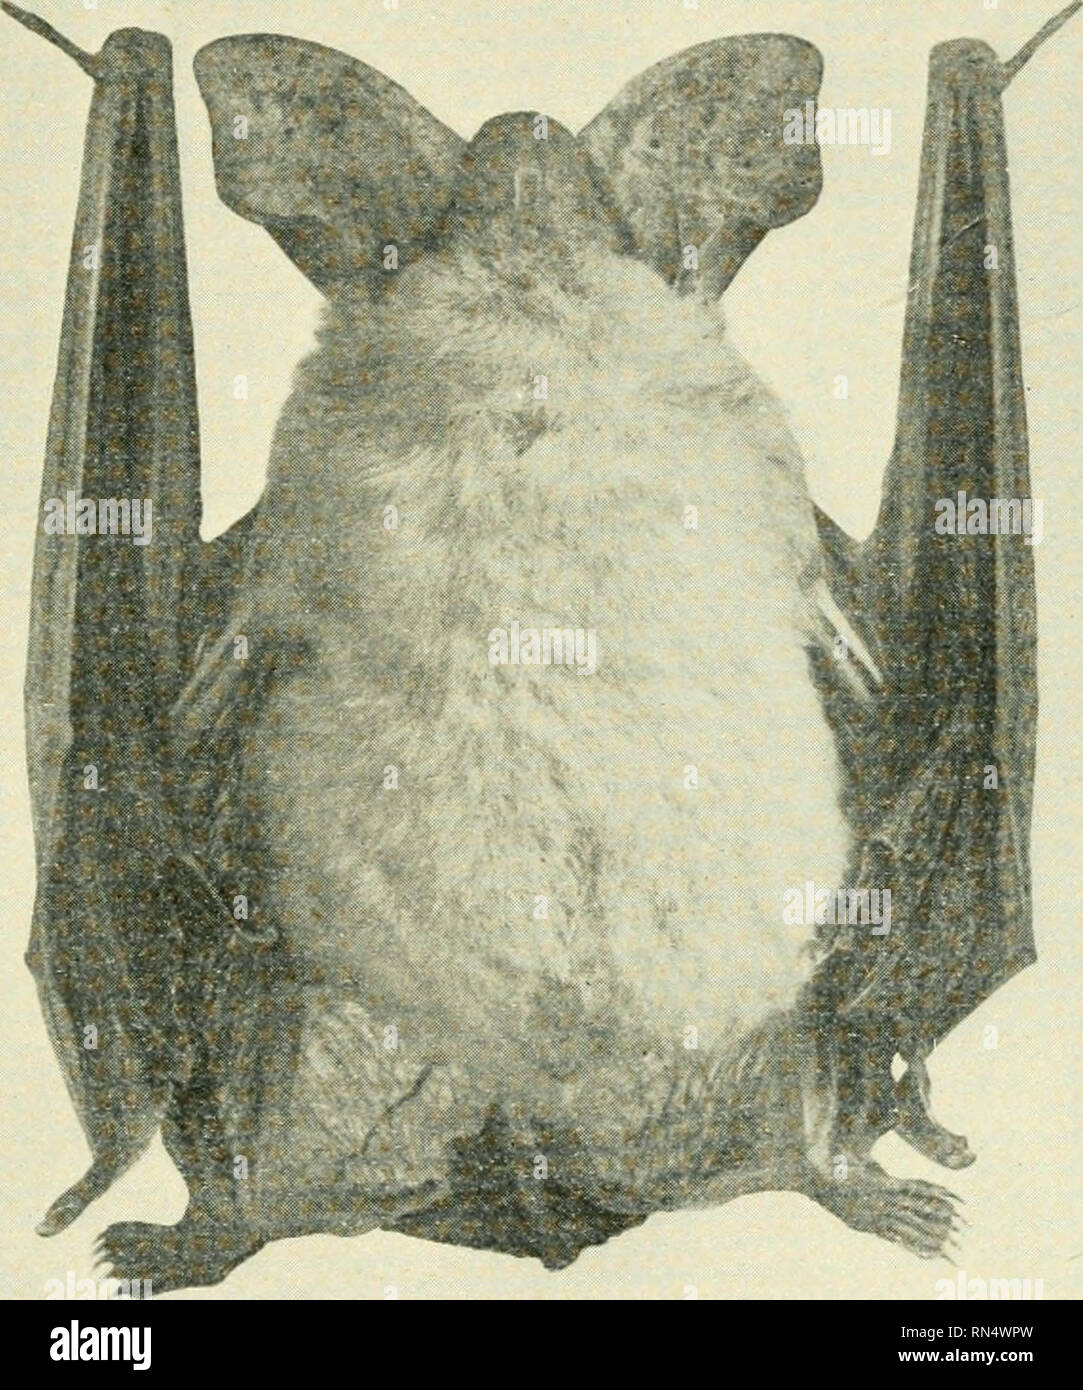 Animal life in the Yosemite; an account of the mammals, birds, reptiles,  and amphibians in a cross-section of the Sierra Nevada. Zoology. BATS 61 to  emerge and drop into the net